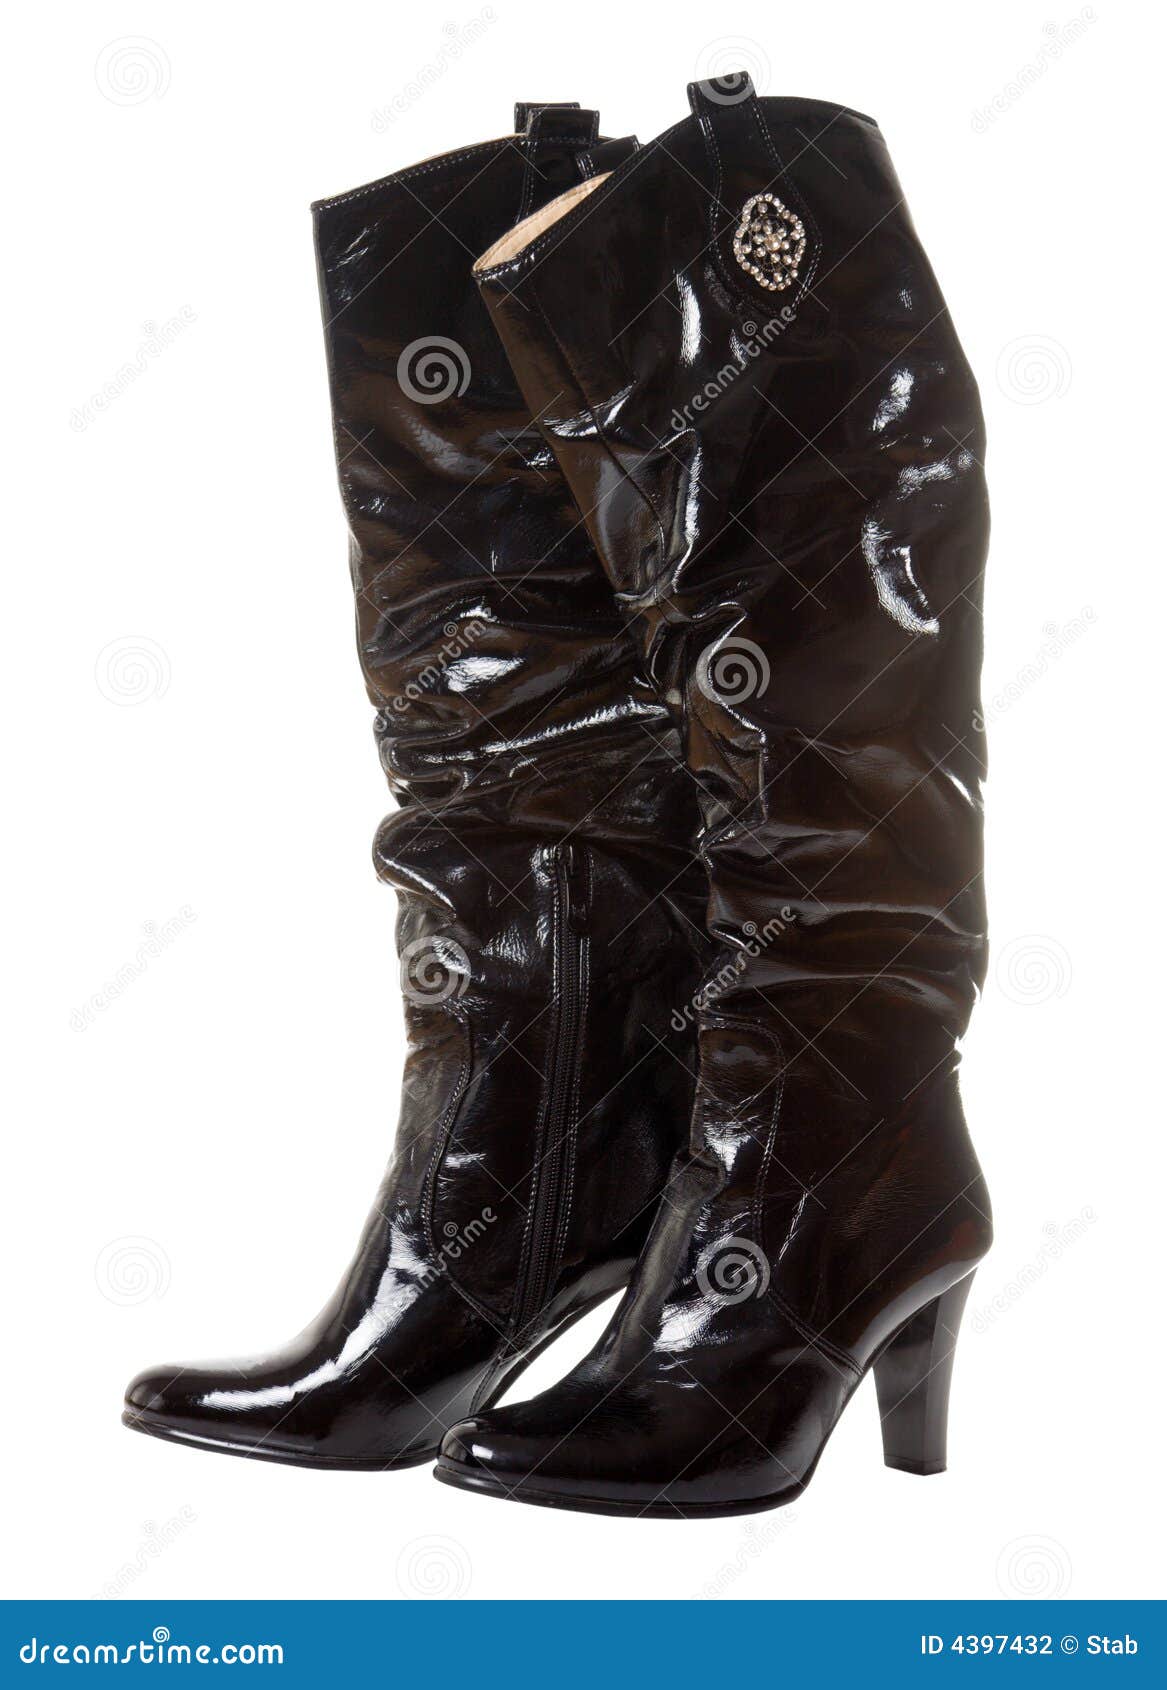 Long shine boot for women stock photo. Image of cold, rubber - 4397432